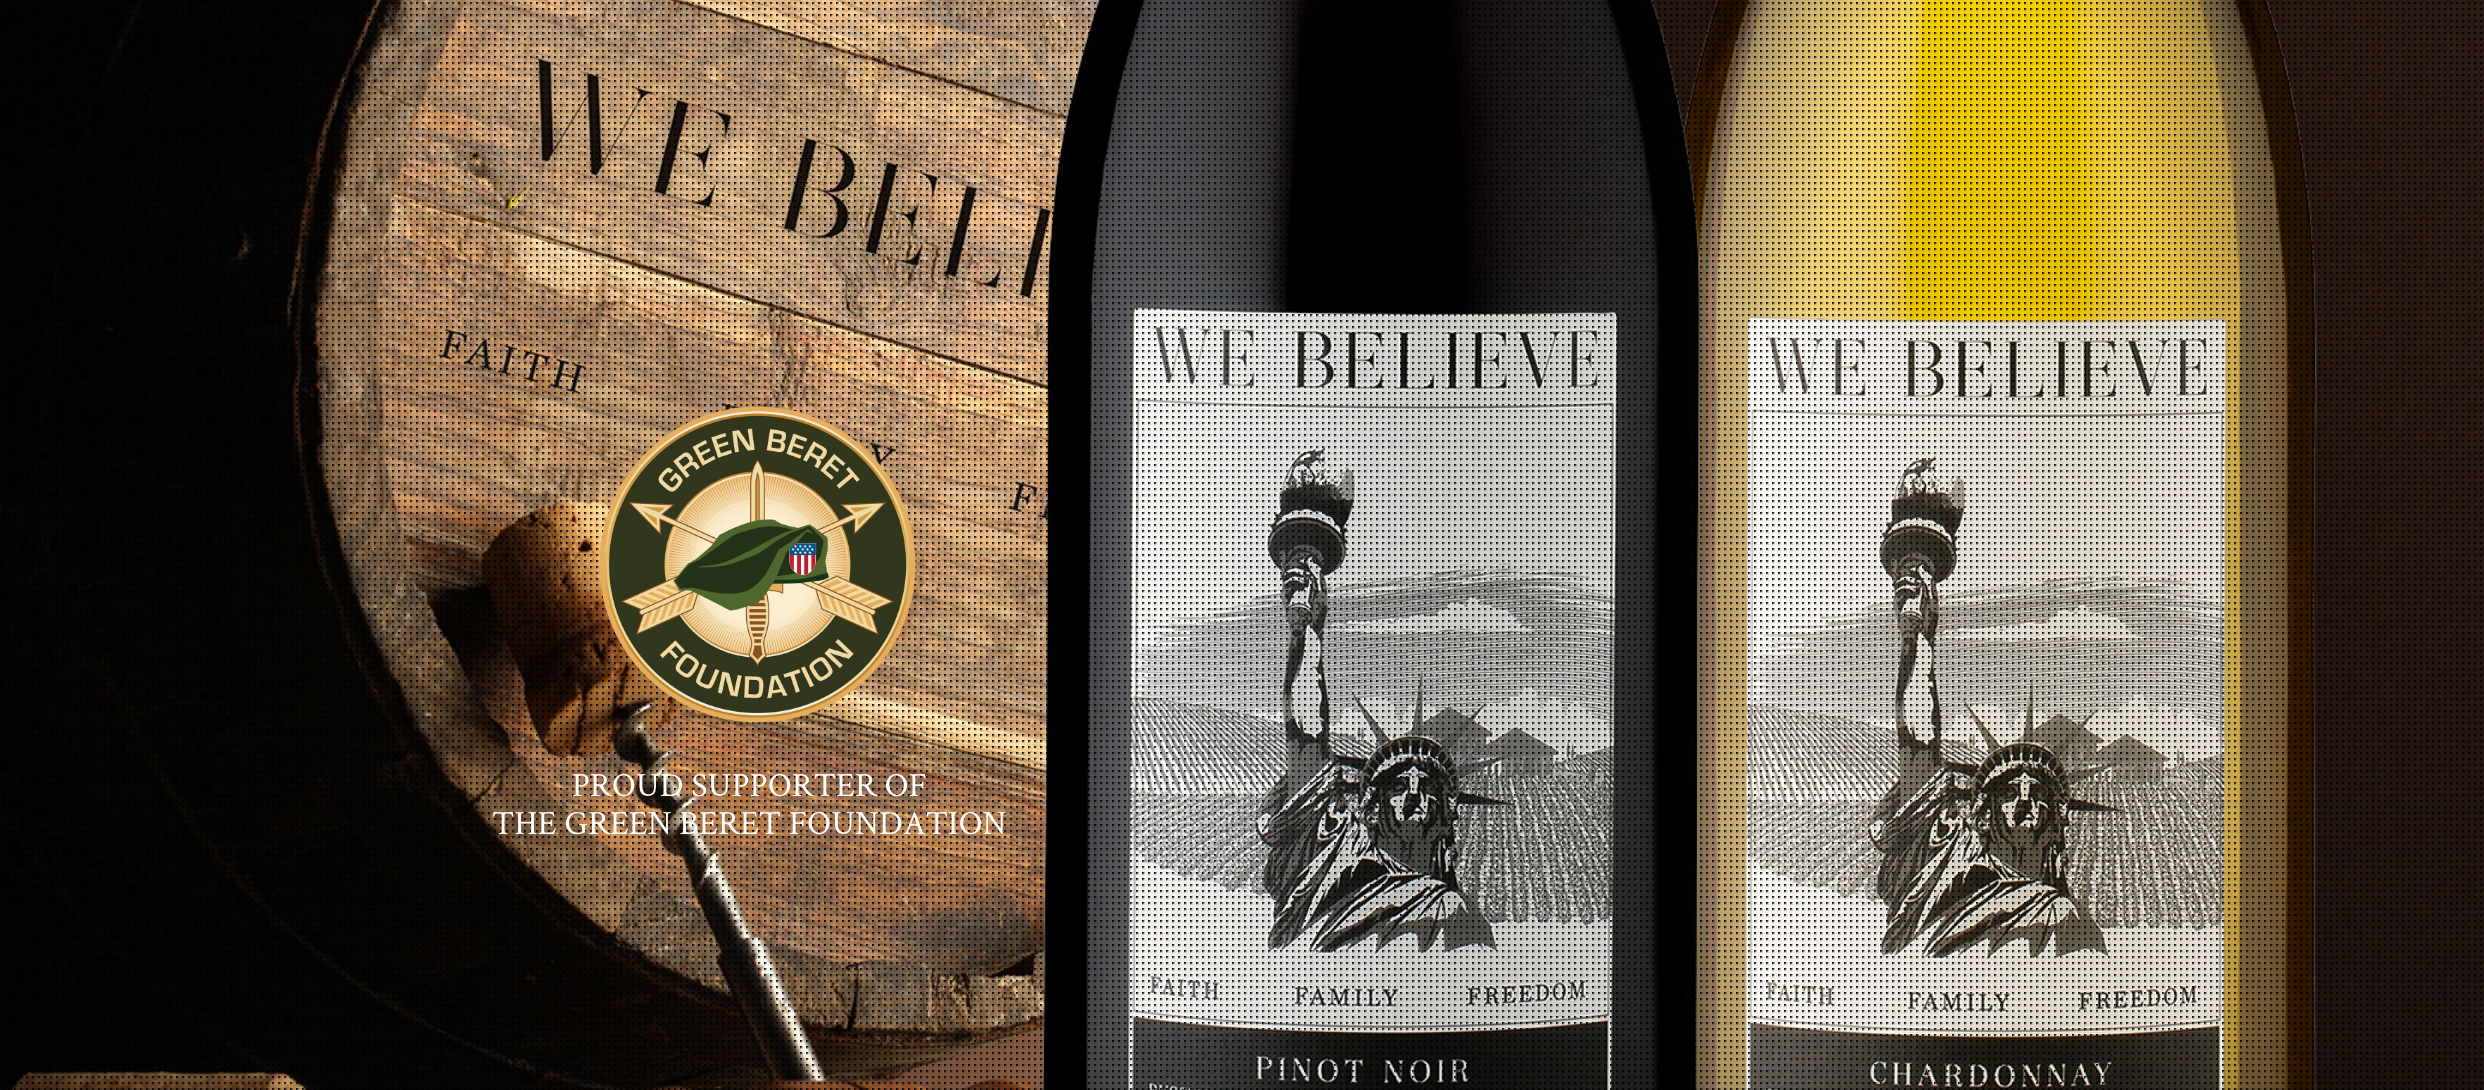 We Believe Wines Bottle Faith, Family and Freedom